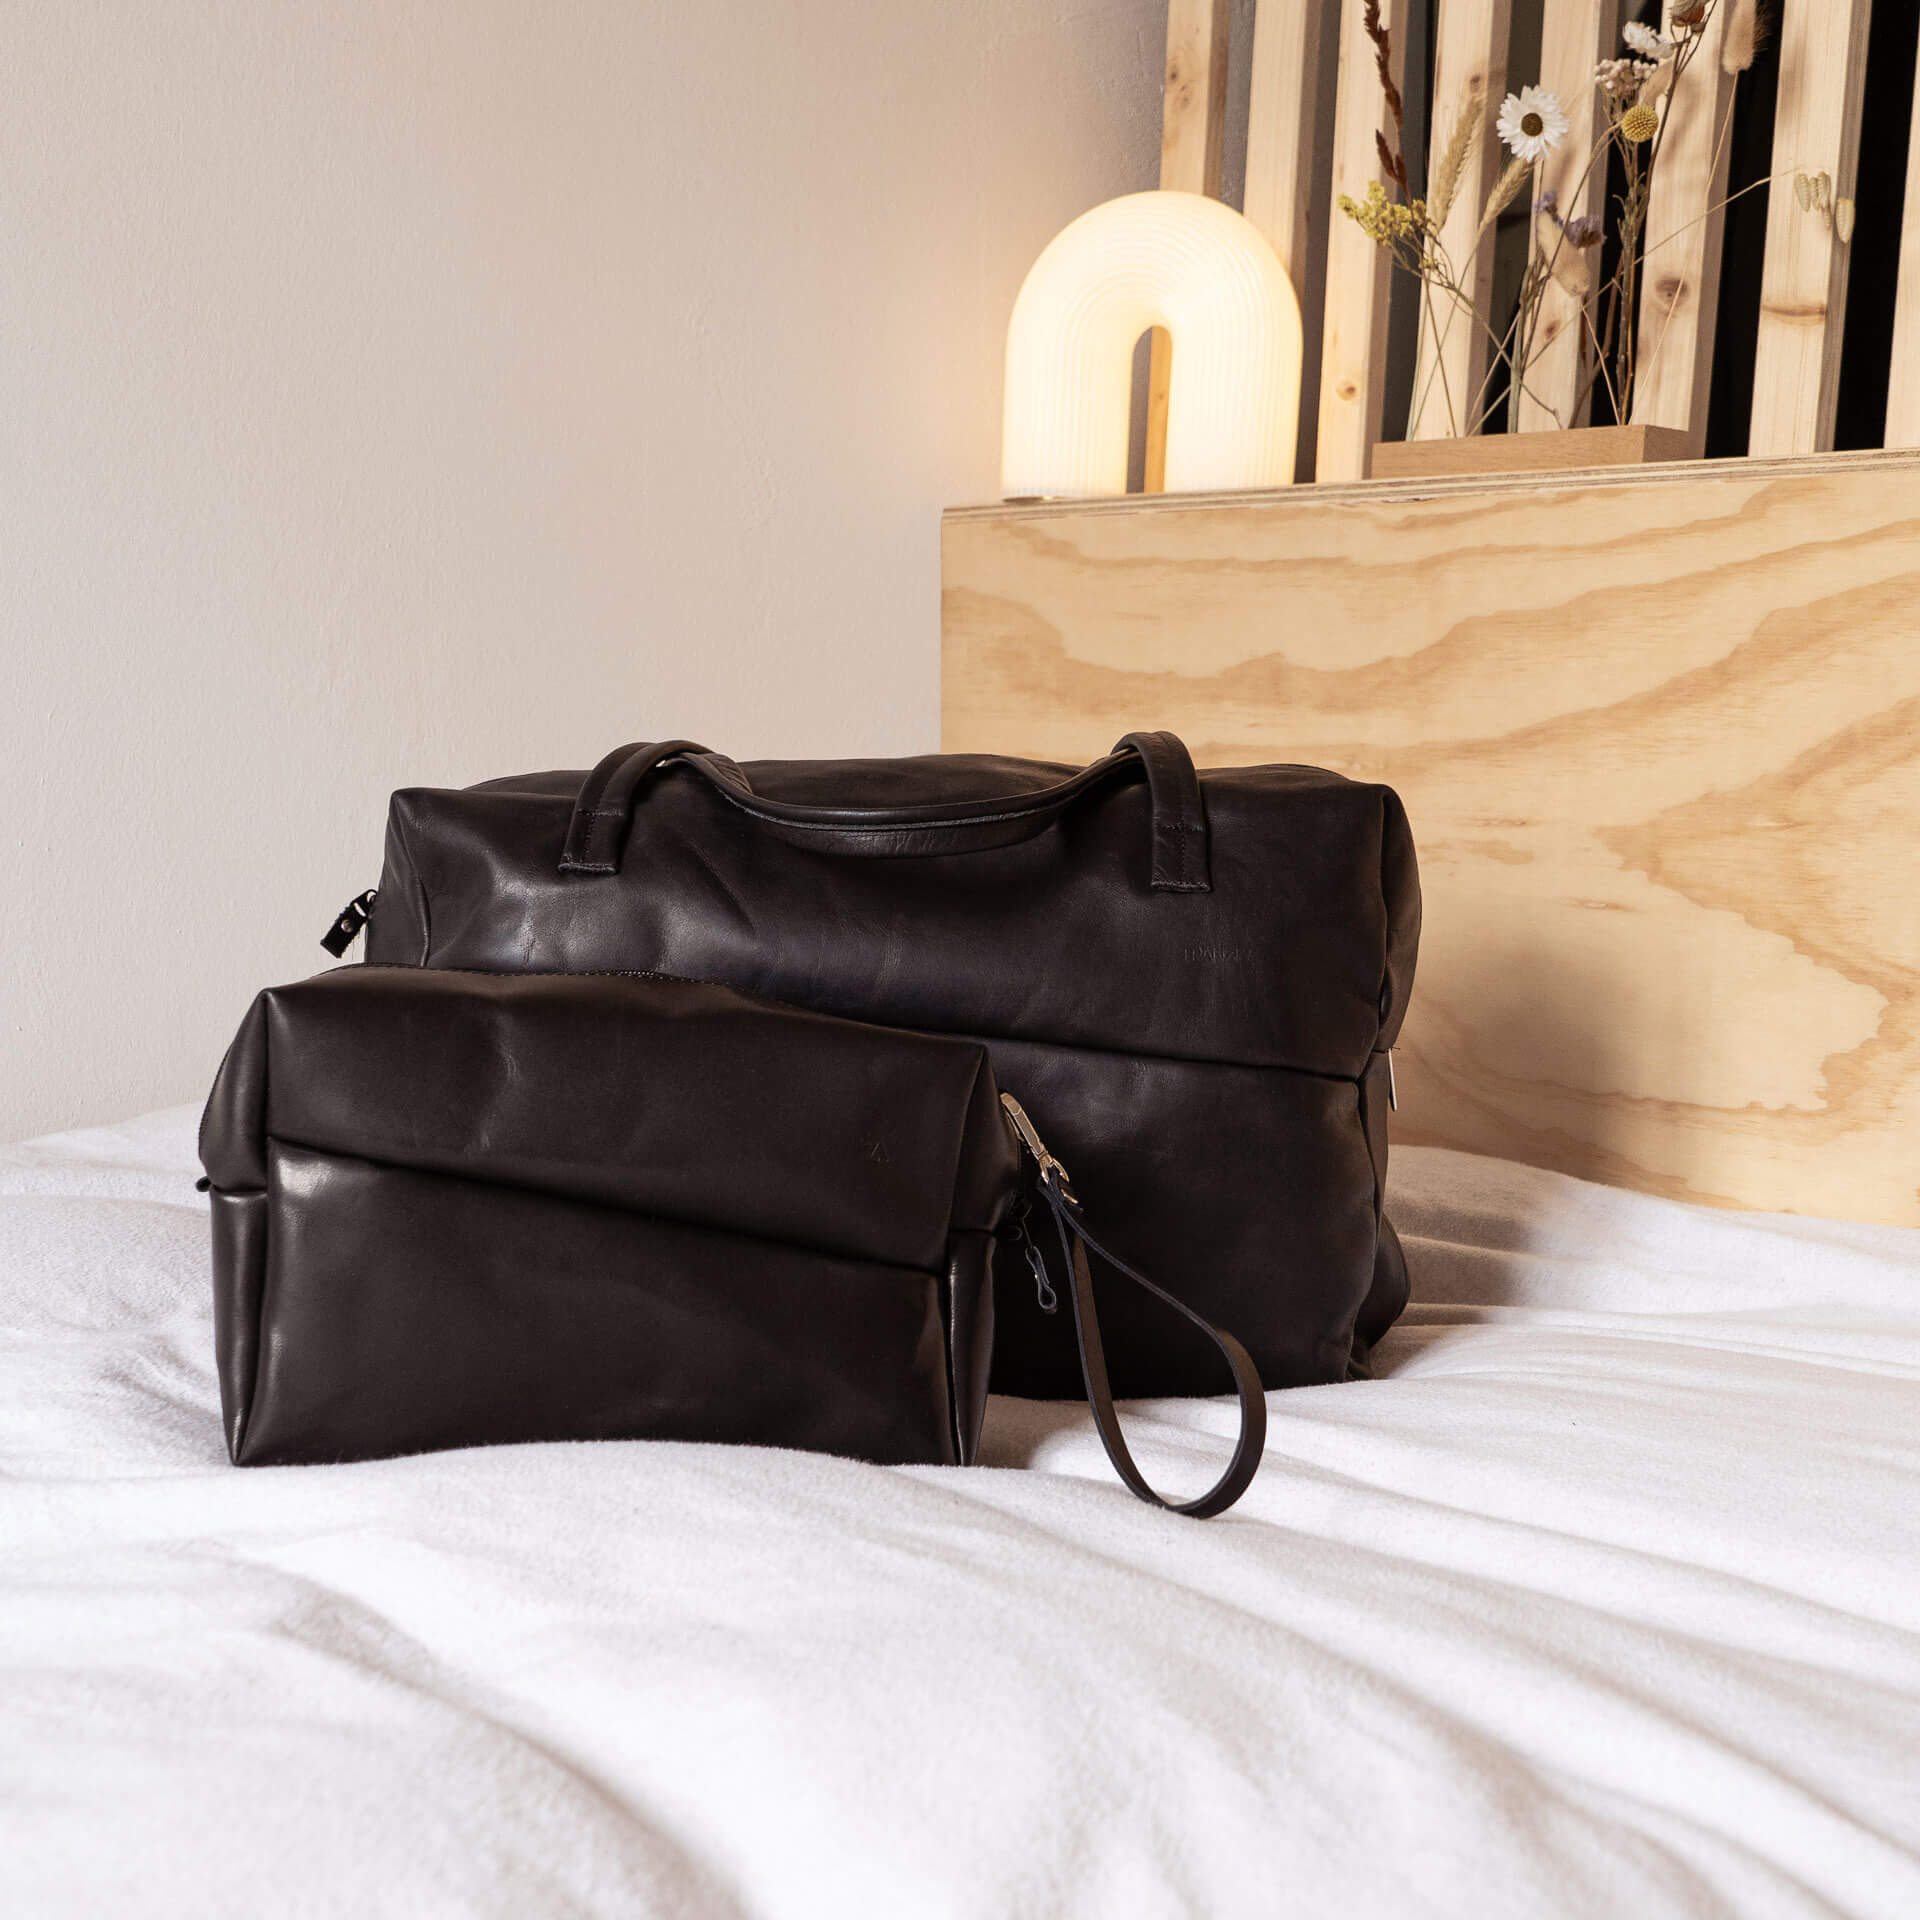 The design of the TAO toilet bag is based on our RIO weekender - and it also fits in perfectly.